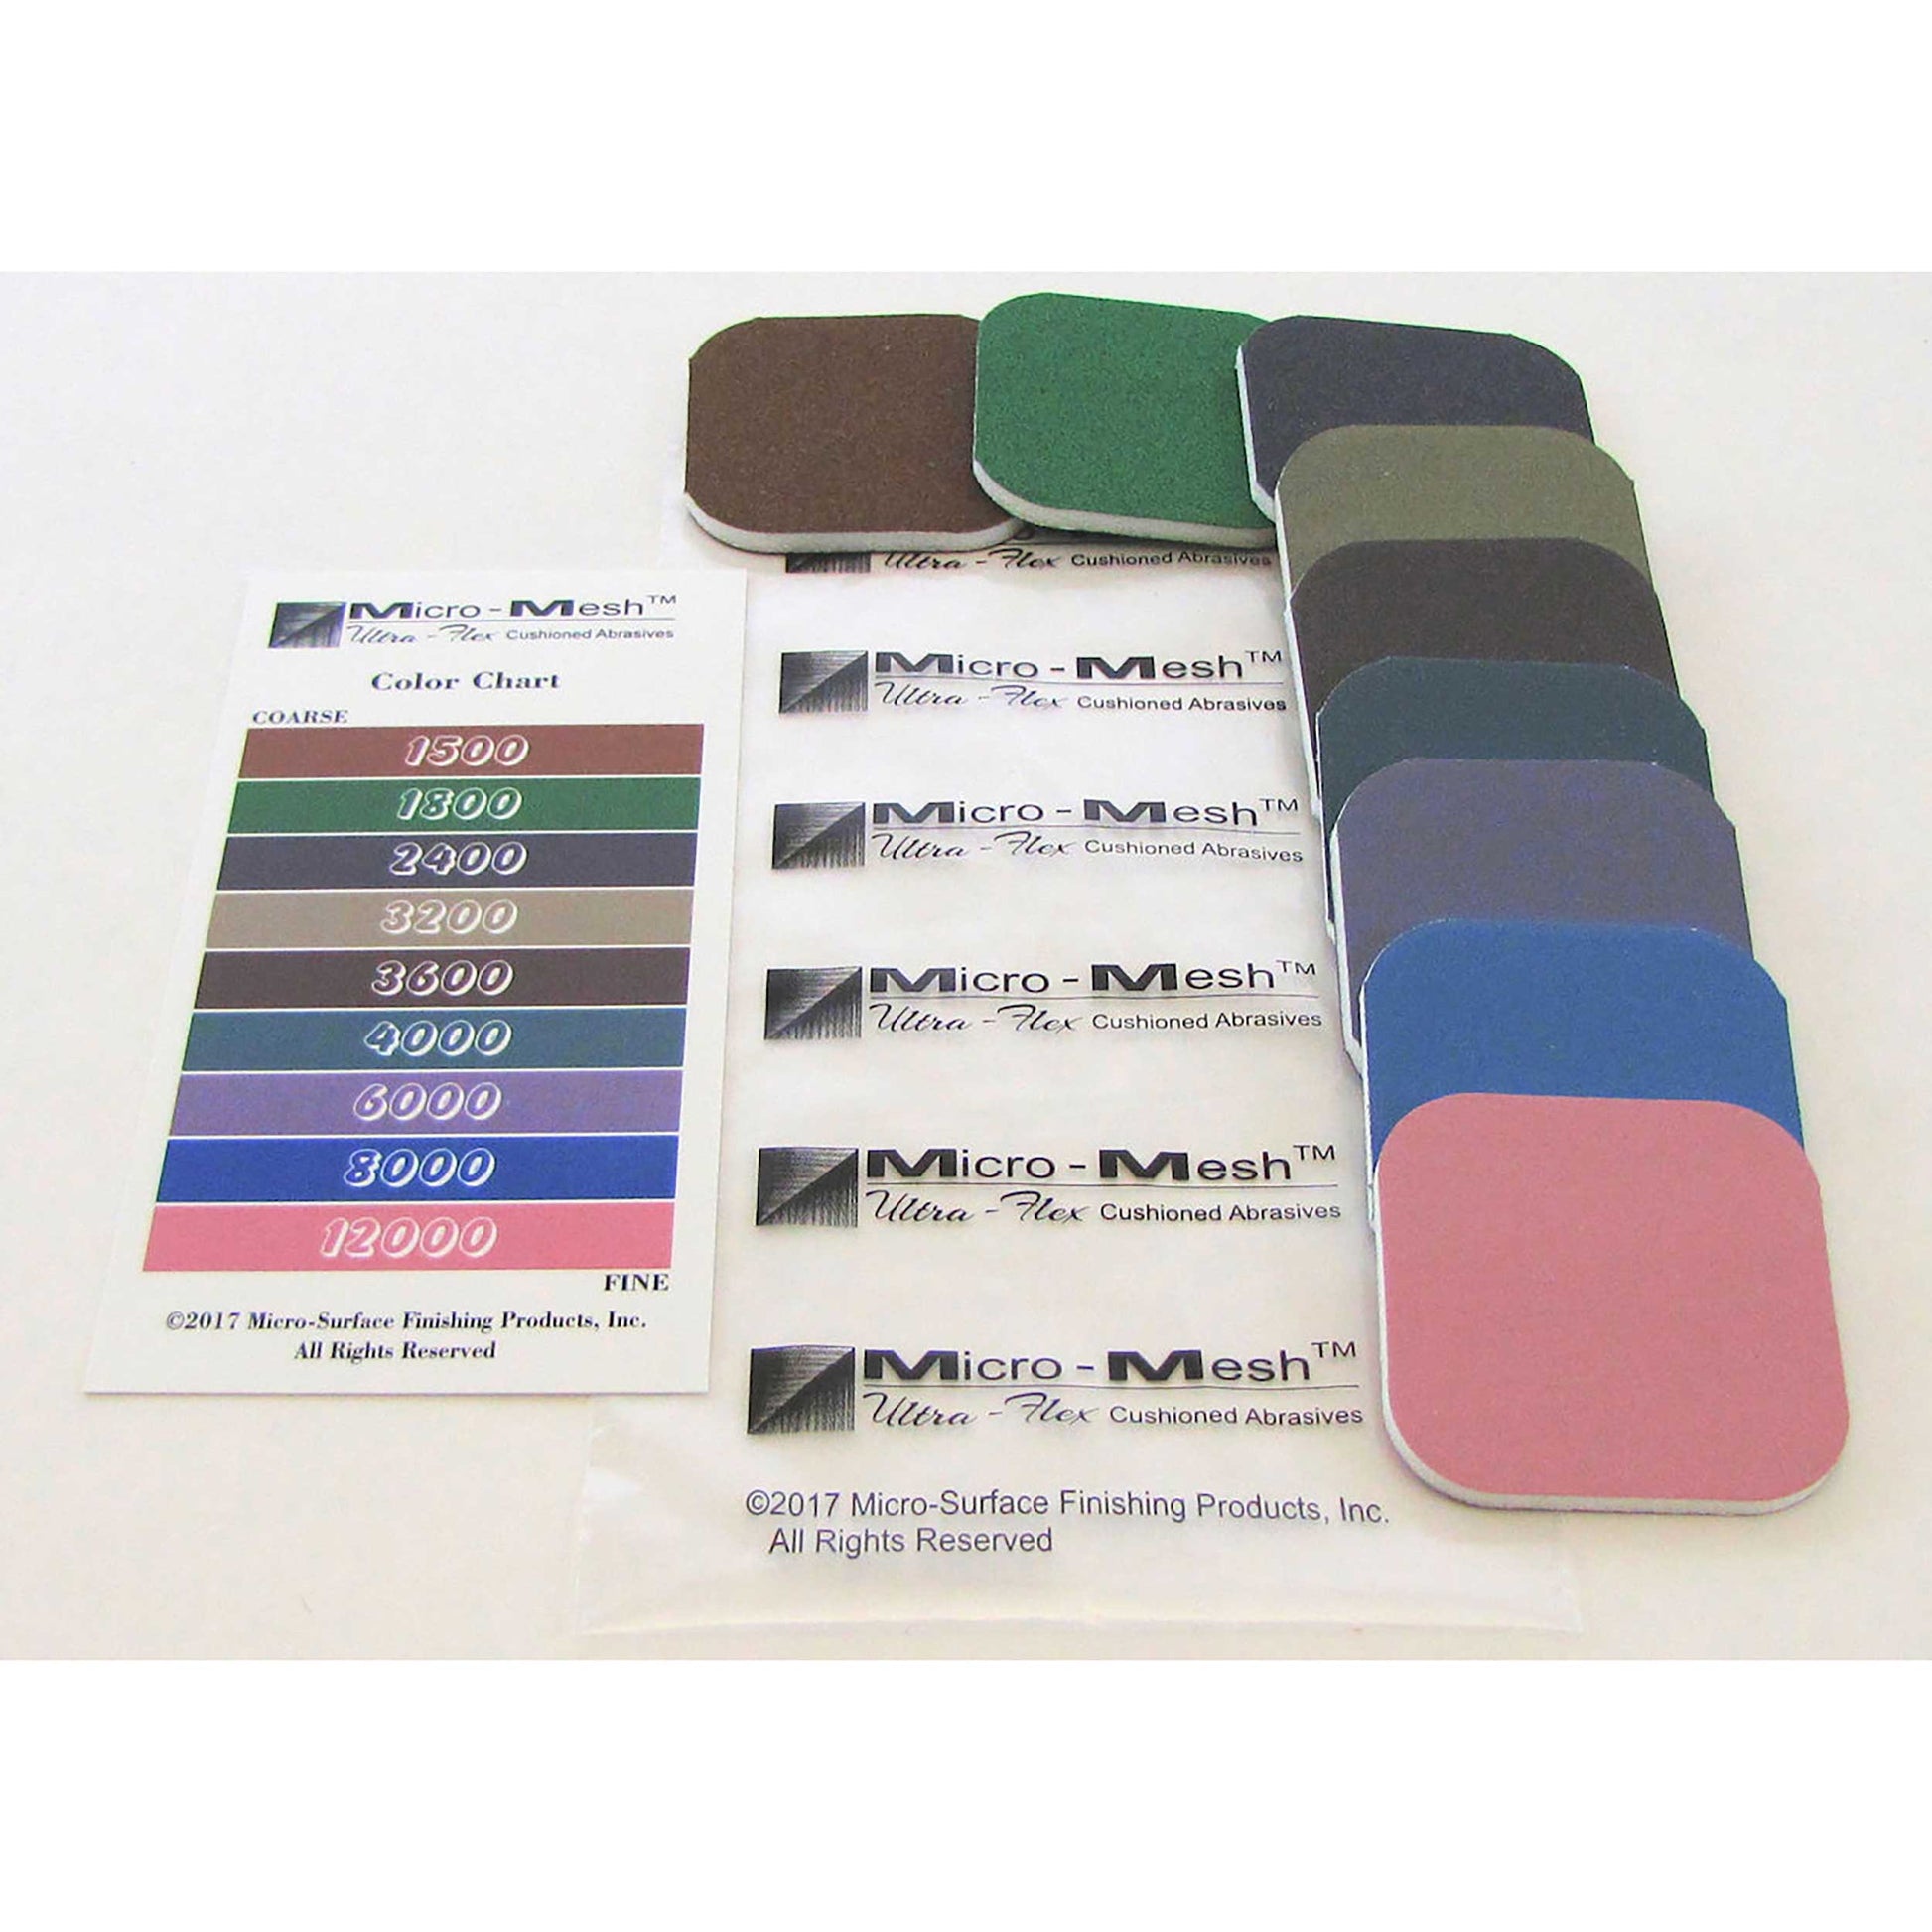 MICRO MESH SANDING SHEETS INTRODUCTORY WOOD KIT by Peachtree